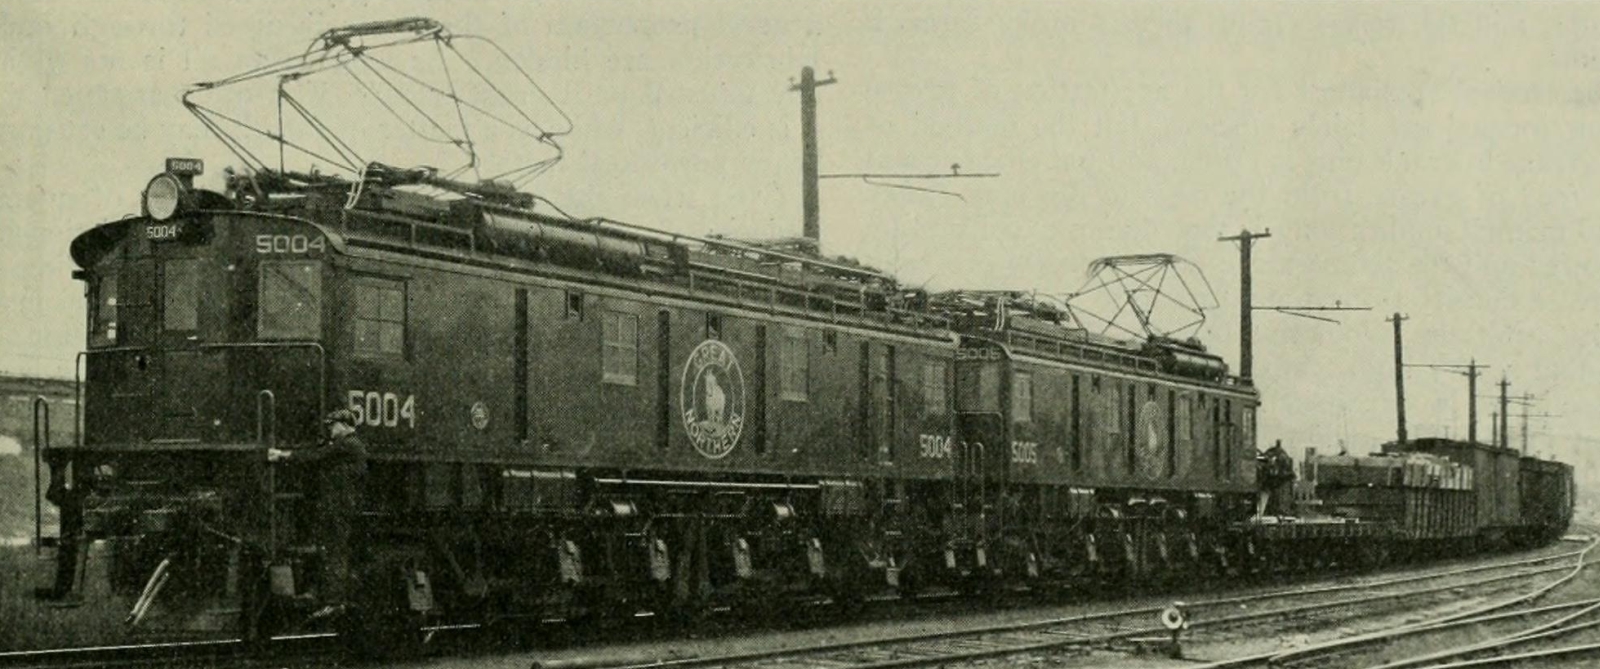 Two Z-1s houble-headed with a freight train